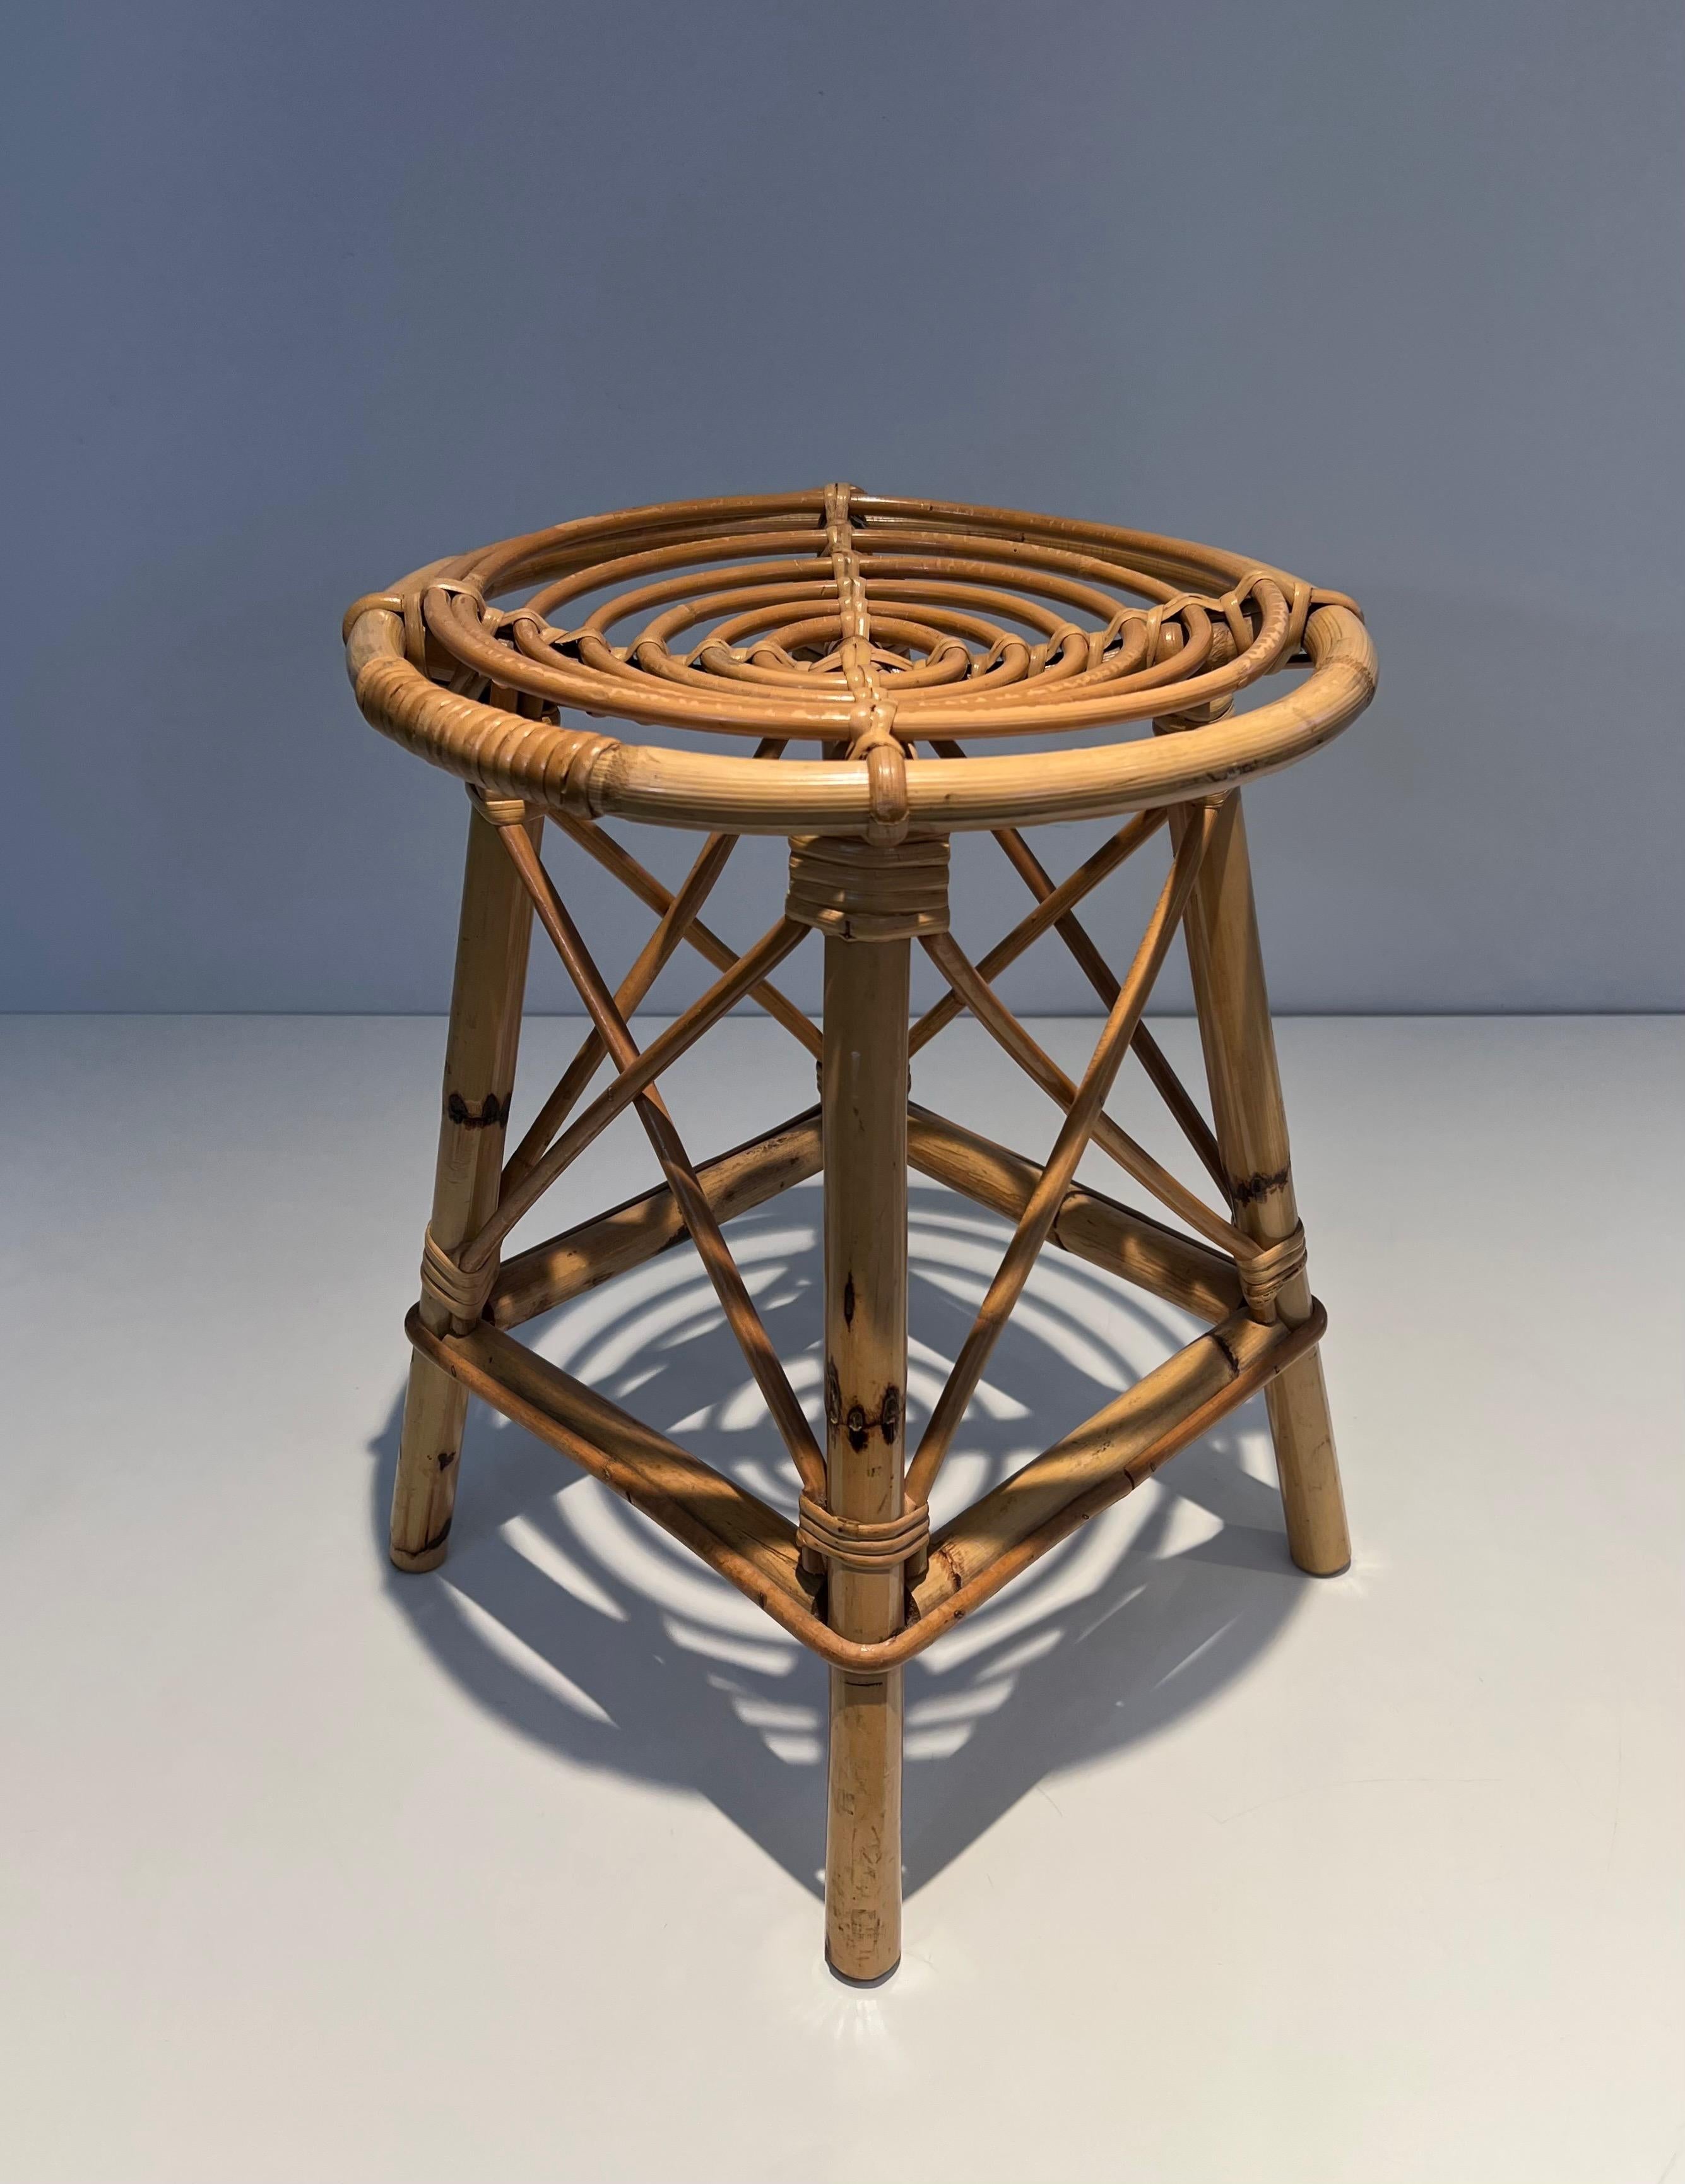 This very nice and decorative stool is made of rattan and bamboo. This is a French work. Circa 1970